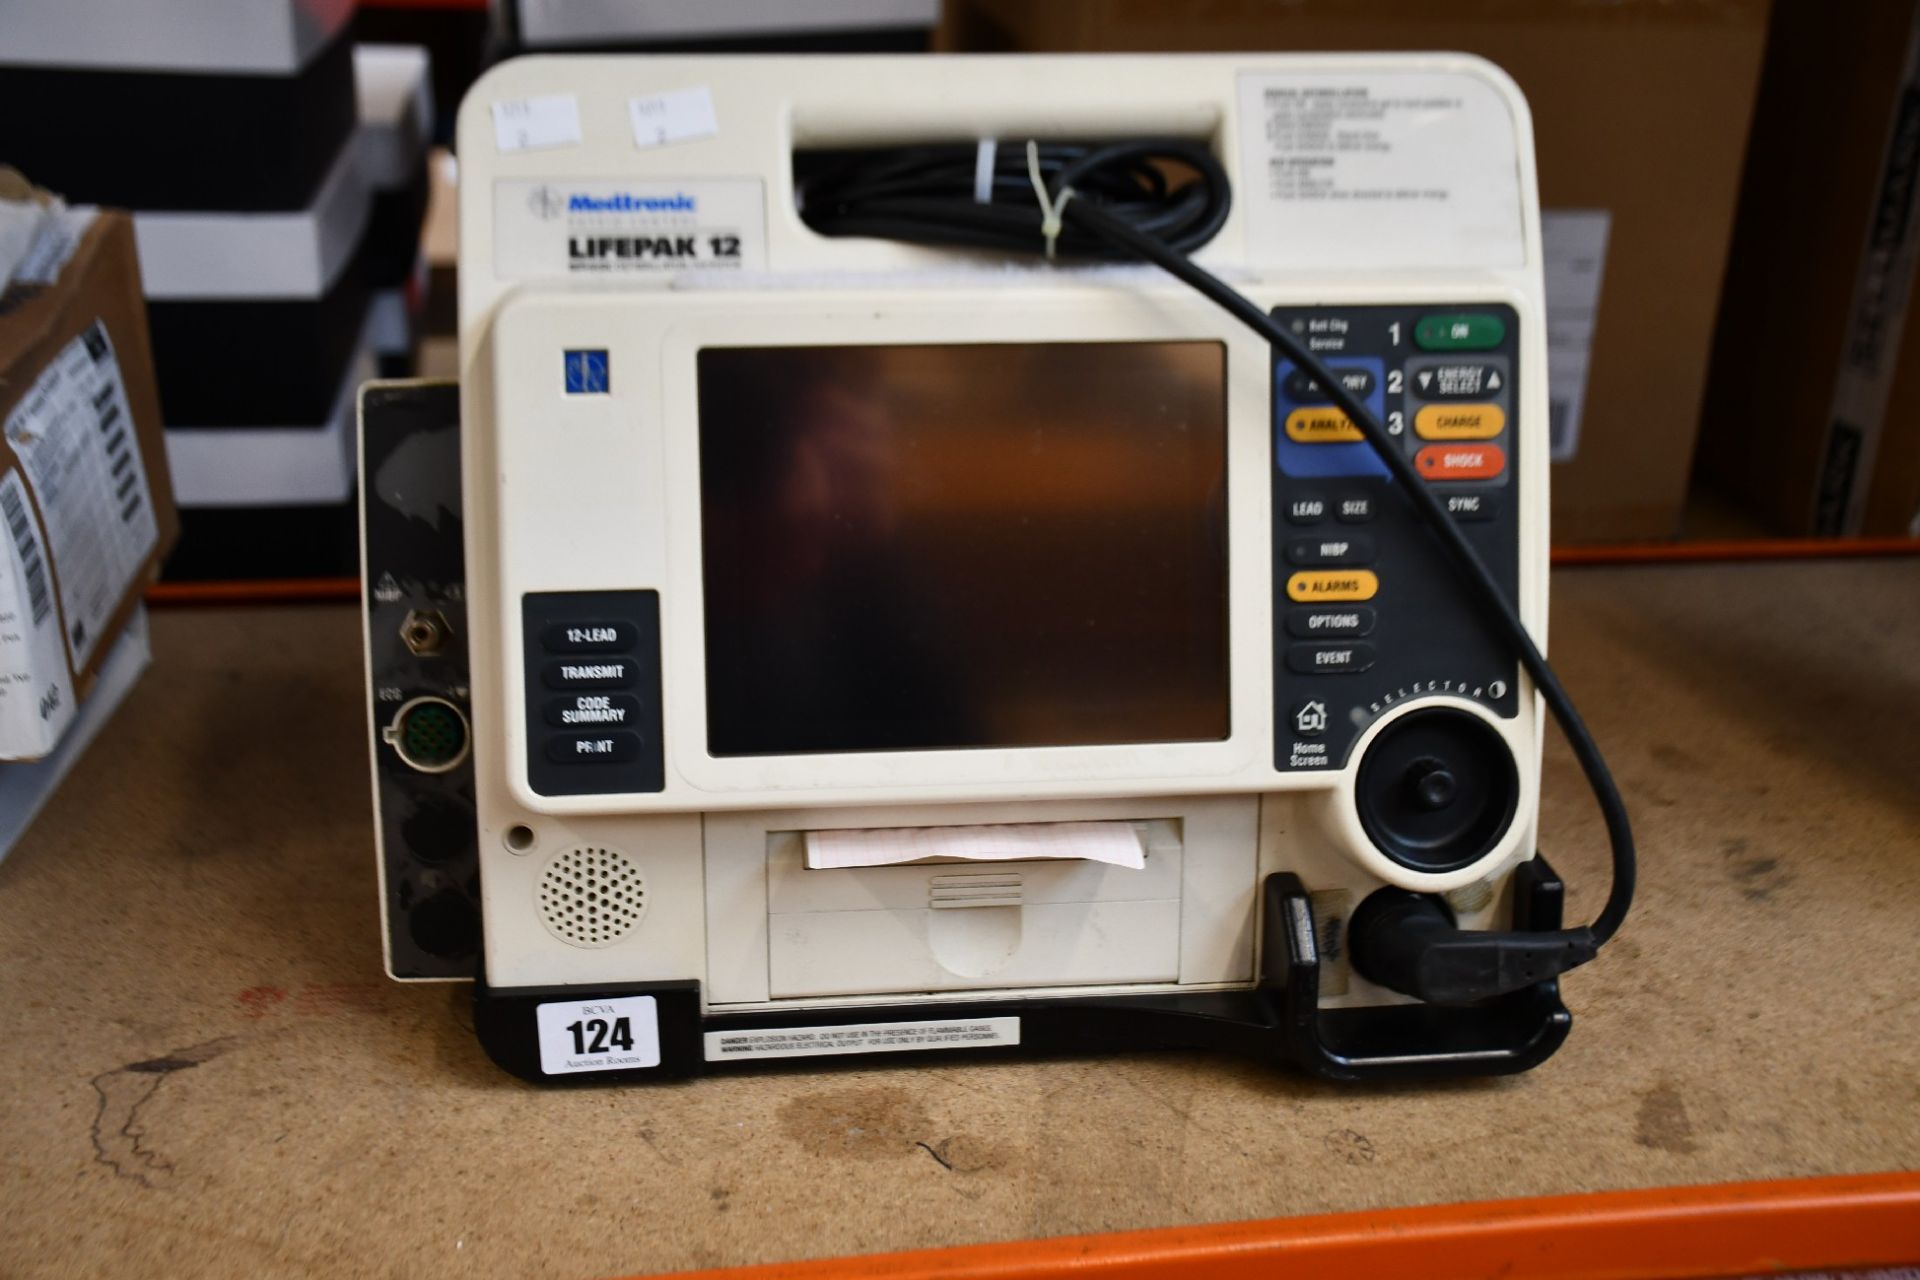 A pre-owned Medtronic Lifepak 12 ECG machine (Batteries not included) (Untested, viewing advised).